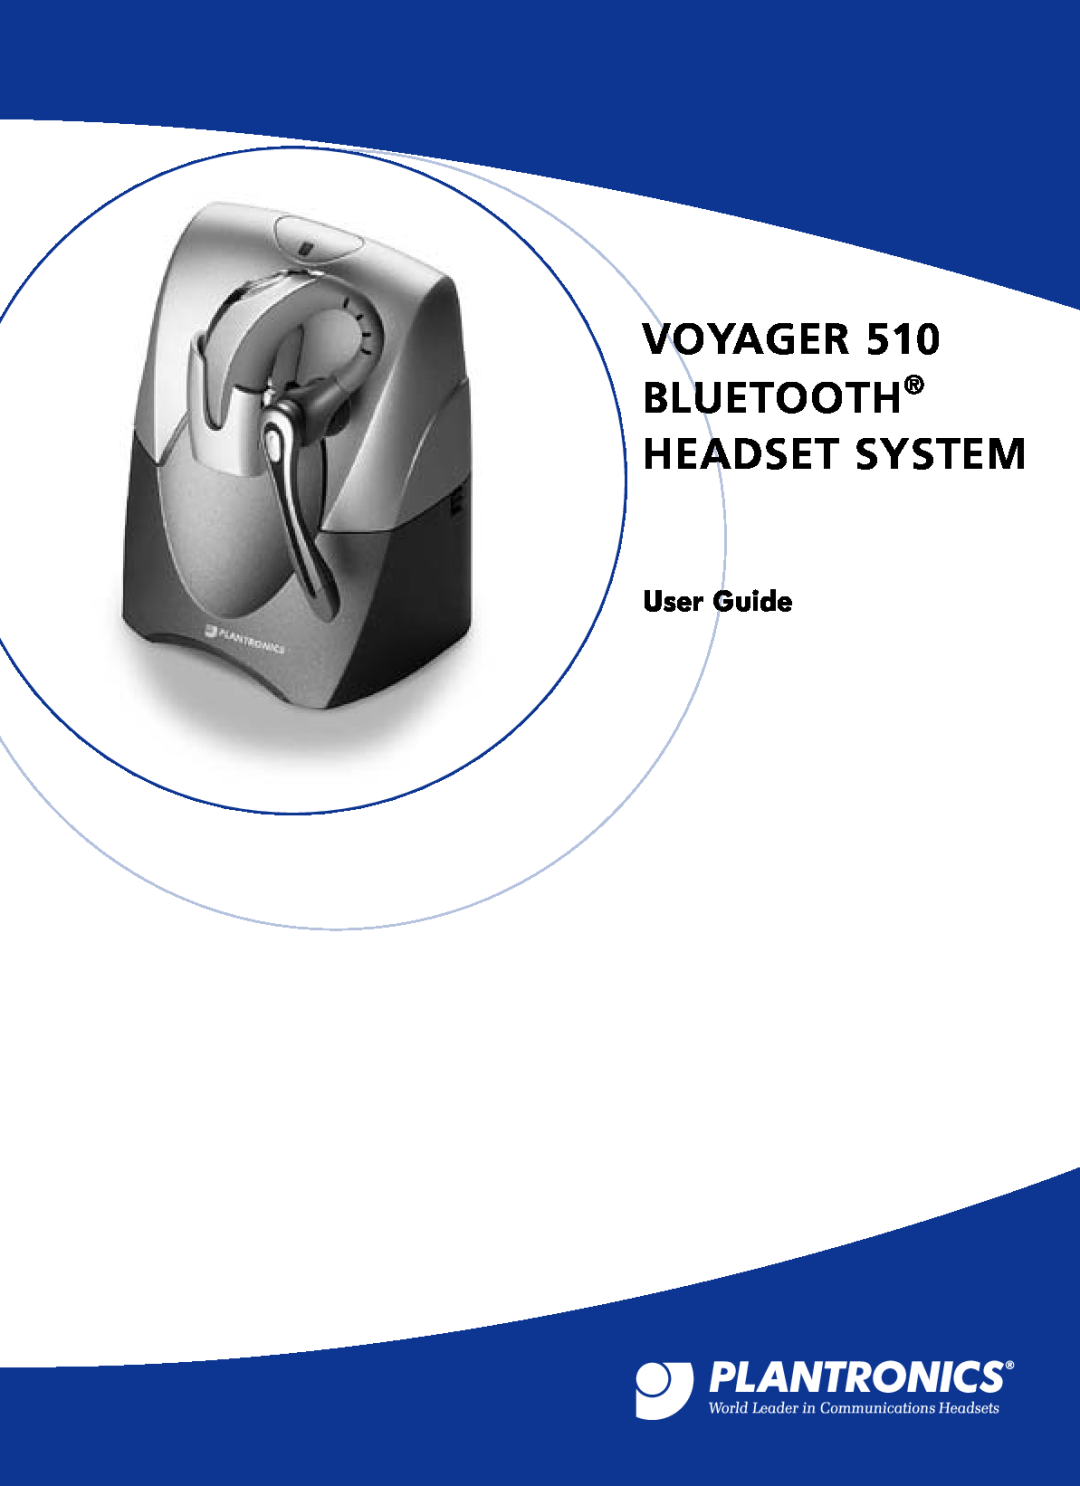 Plantronics 510 manual Voyager, Bluetooth Headset System, User Guide 